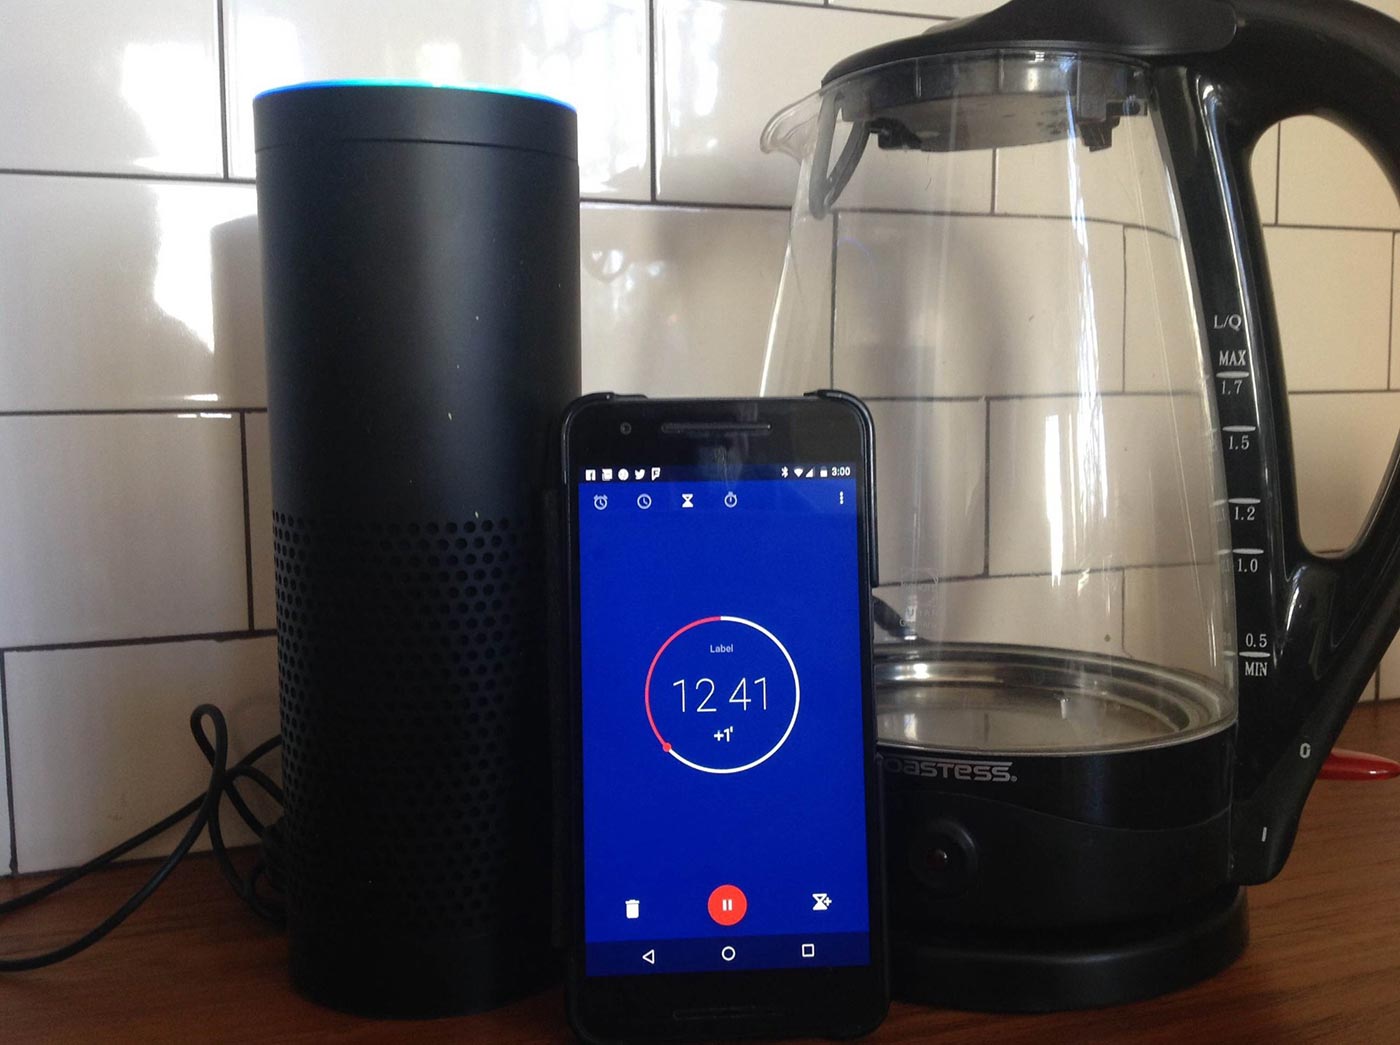 Tim O'Reilly's Alexa, his Nexus 6P, and his kettle. It's his kitchen's attack on the cell phone OS.